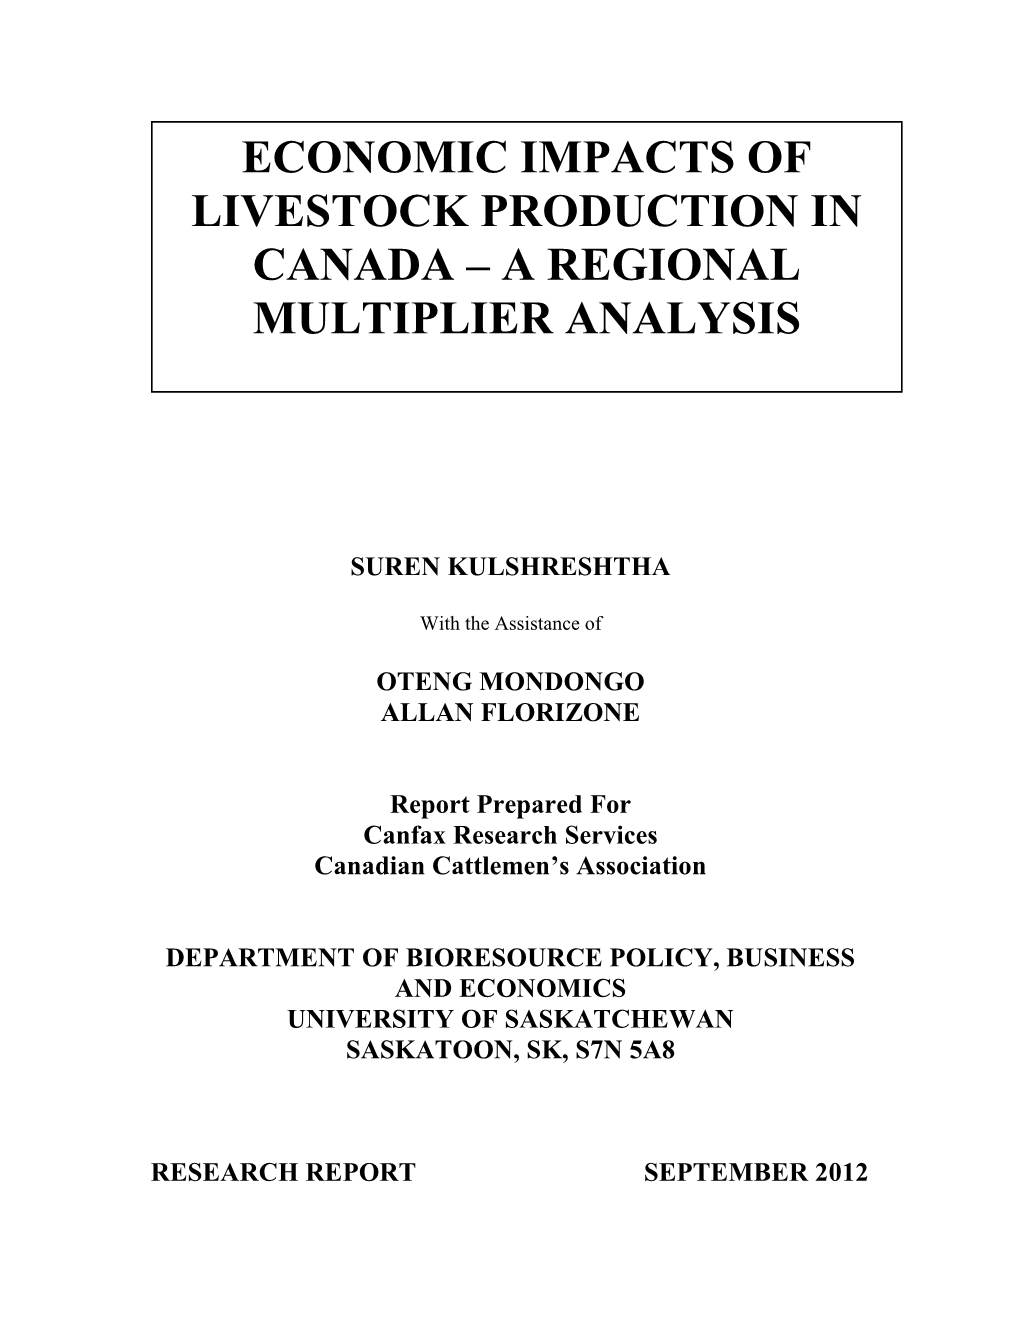 Economic Impacts of Livestock Production in Canada – a Regional Multiplier Analysis